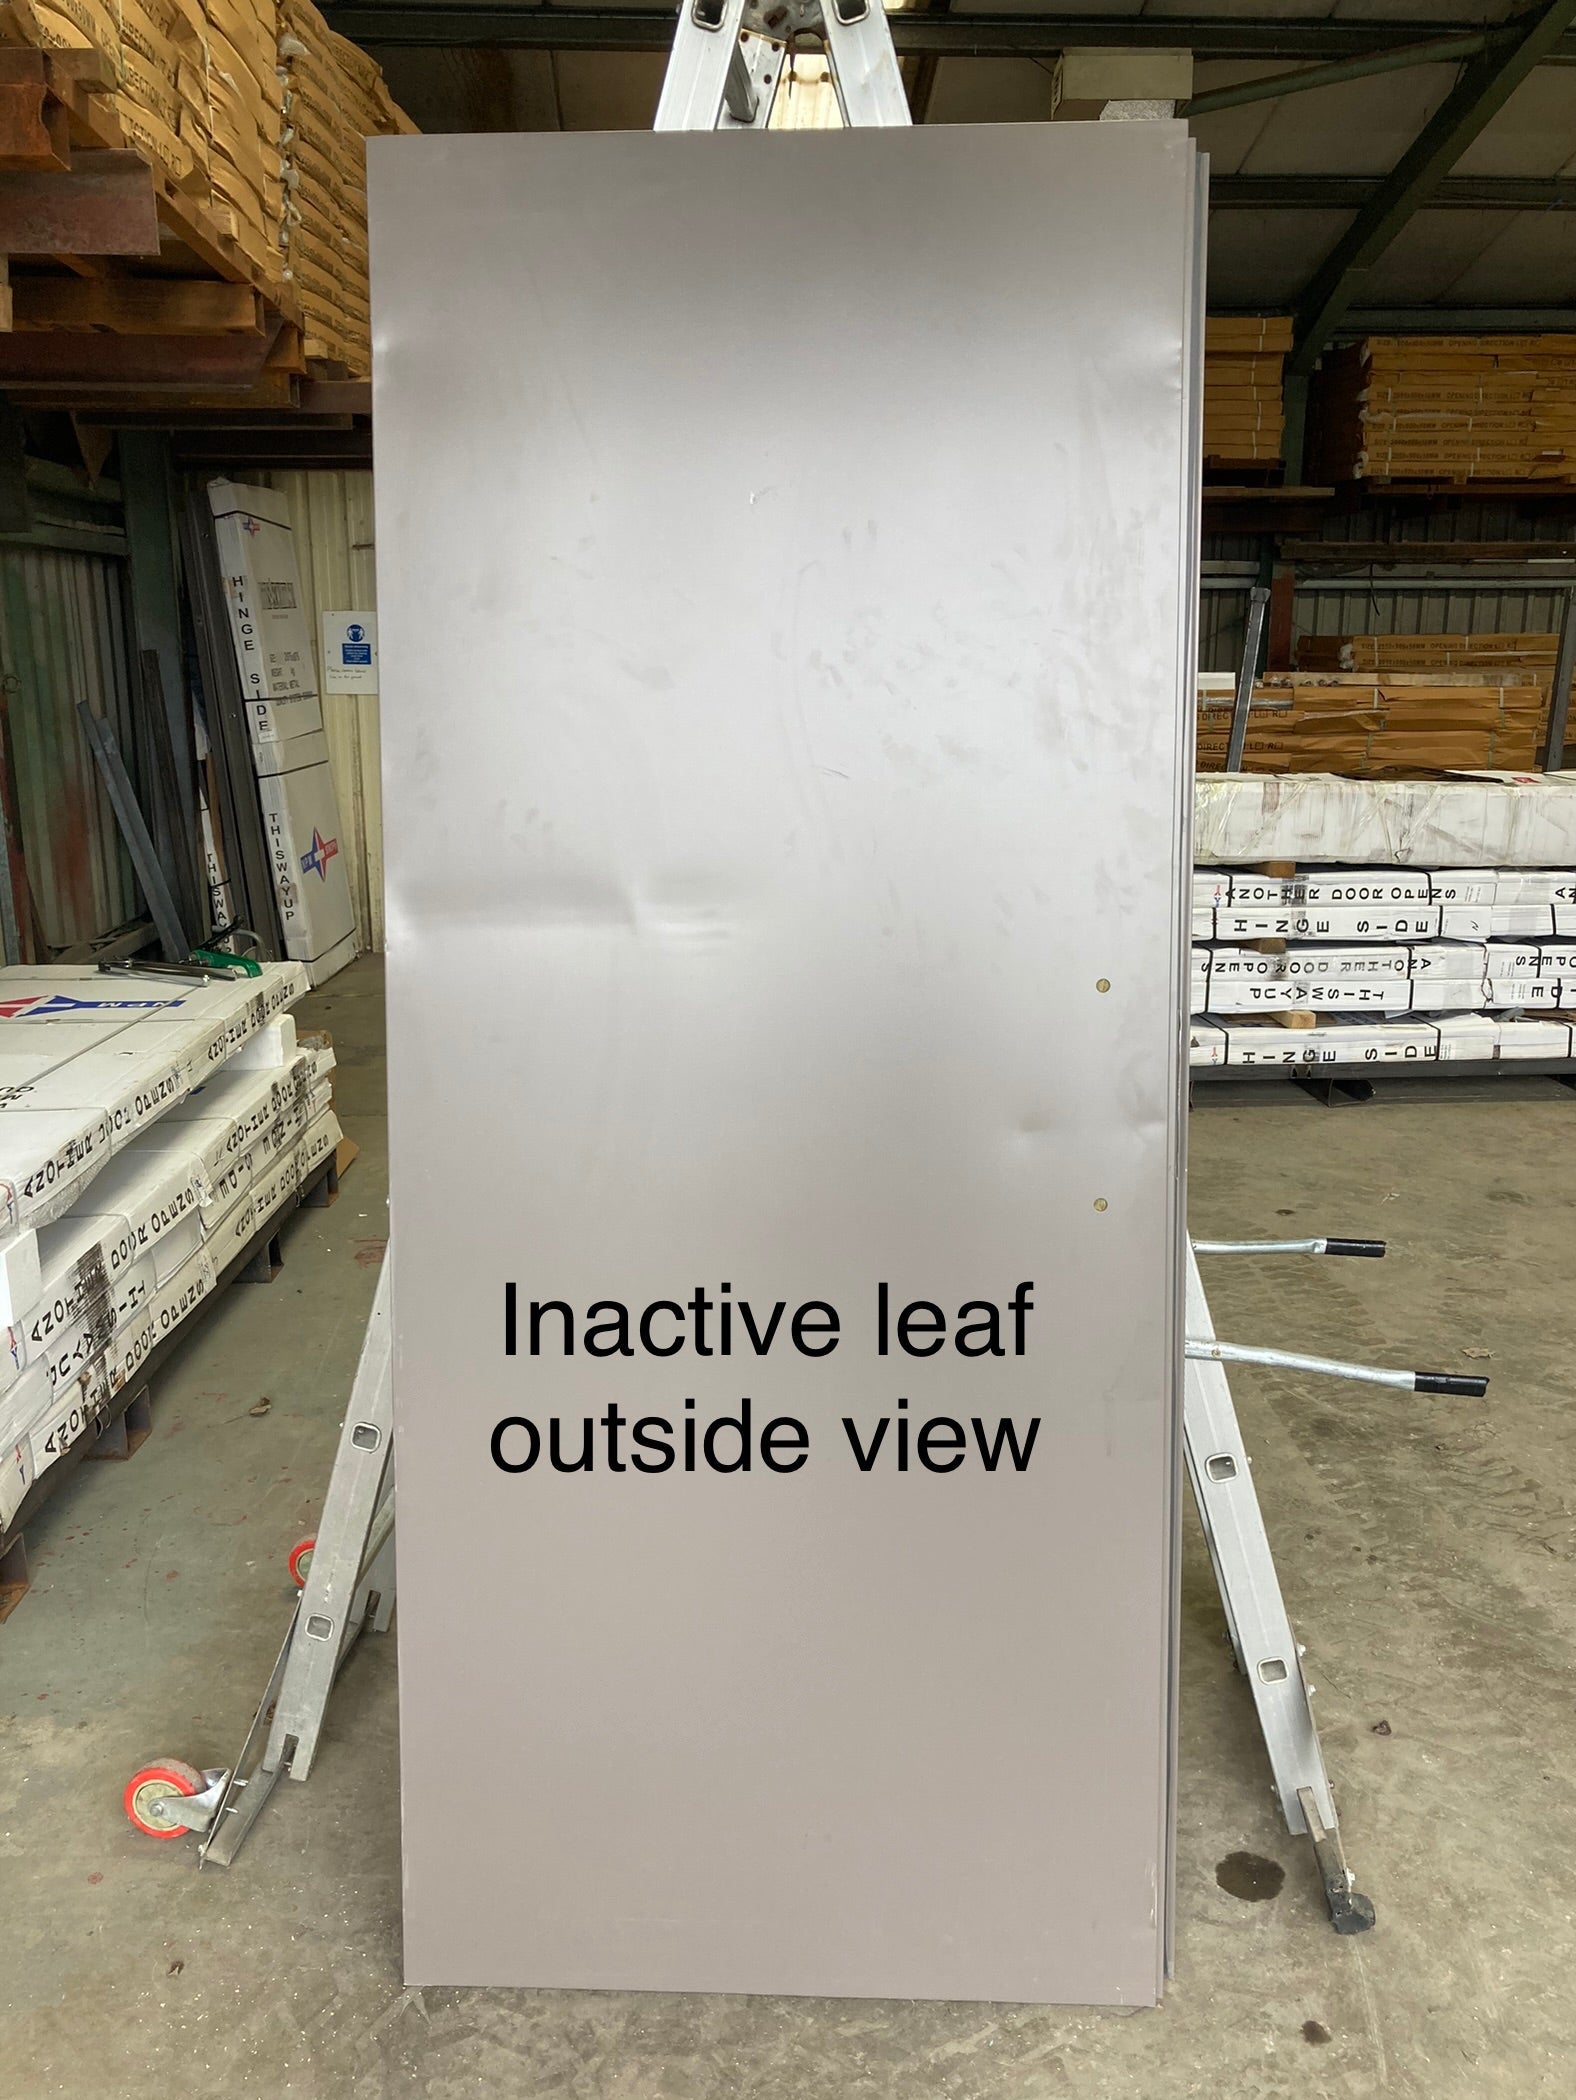 Inactive leaf outside view - small dents